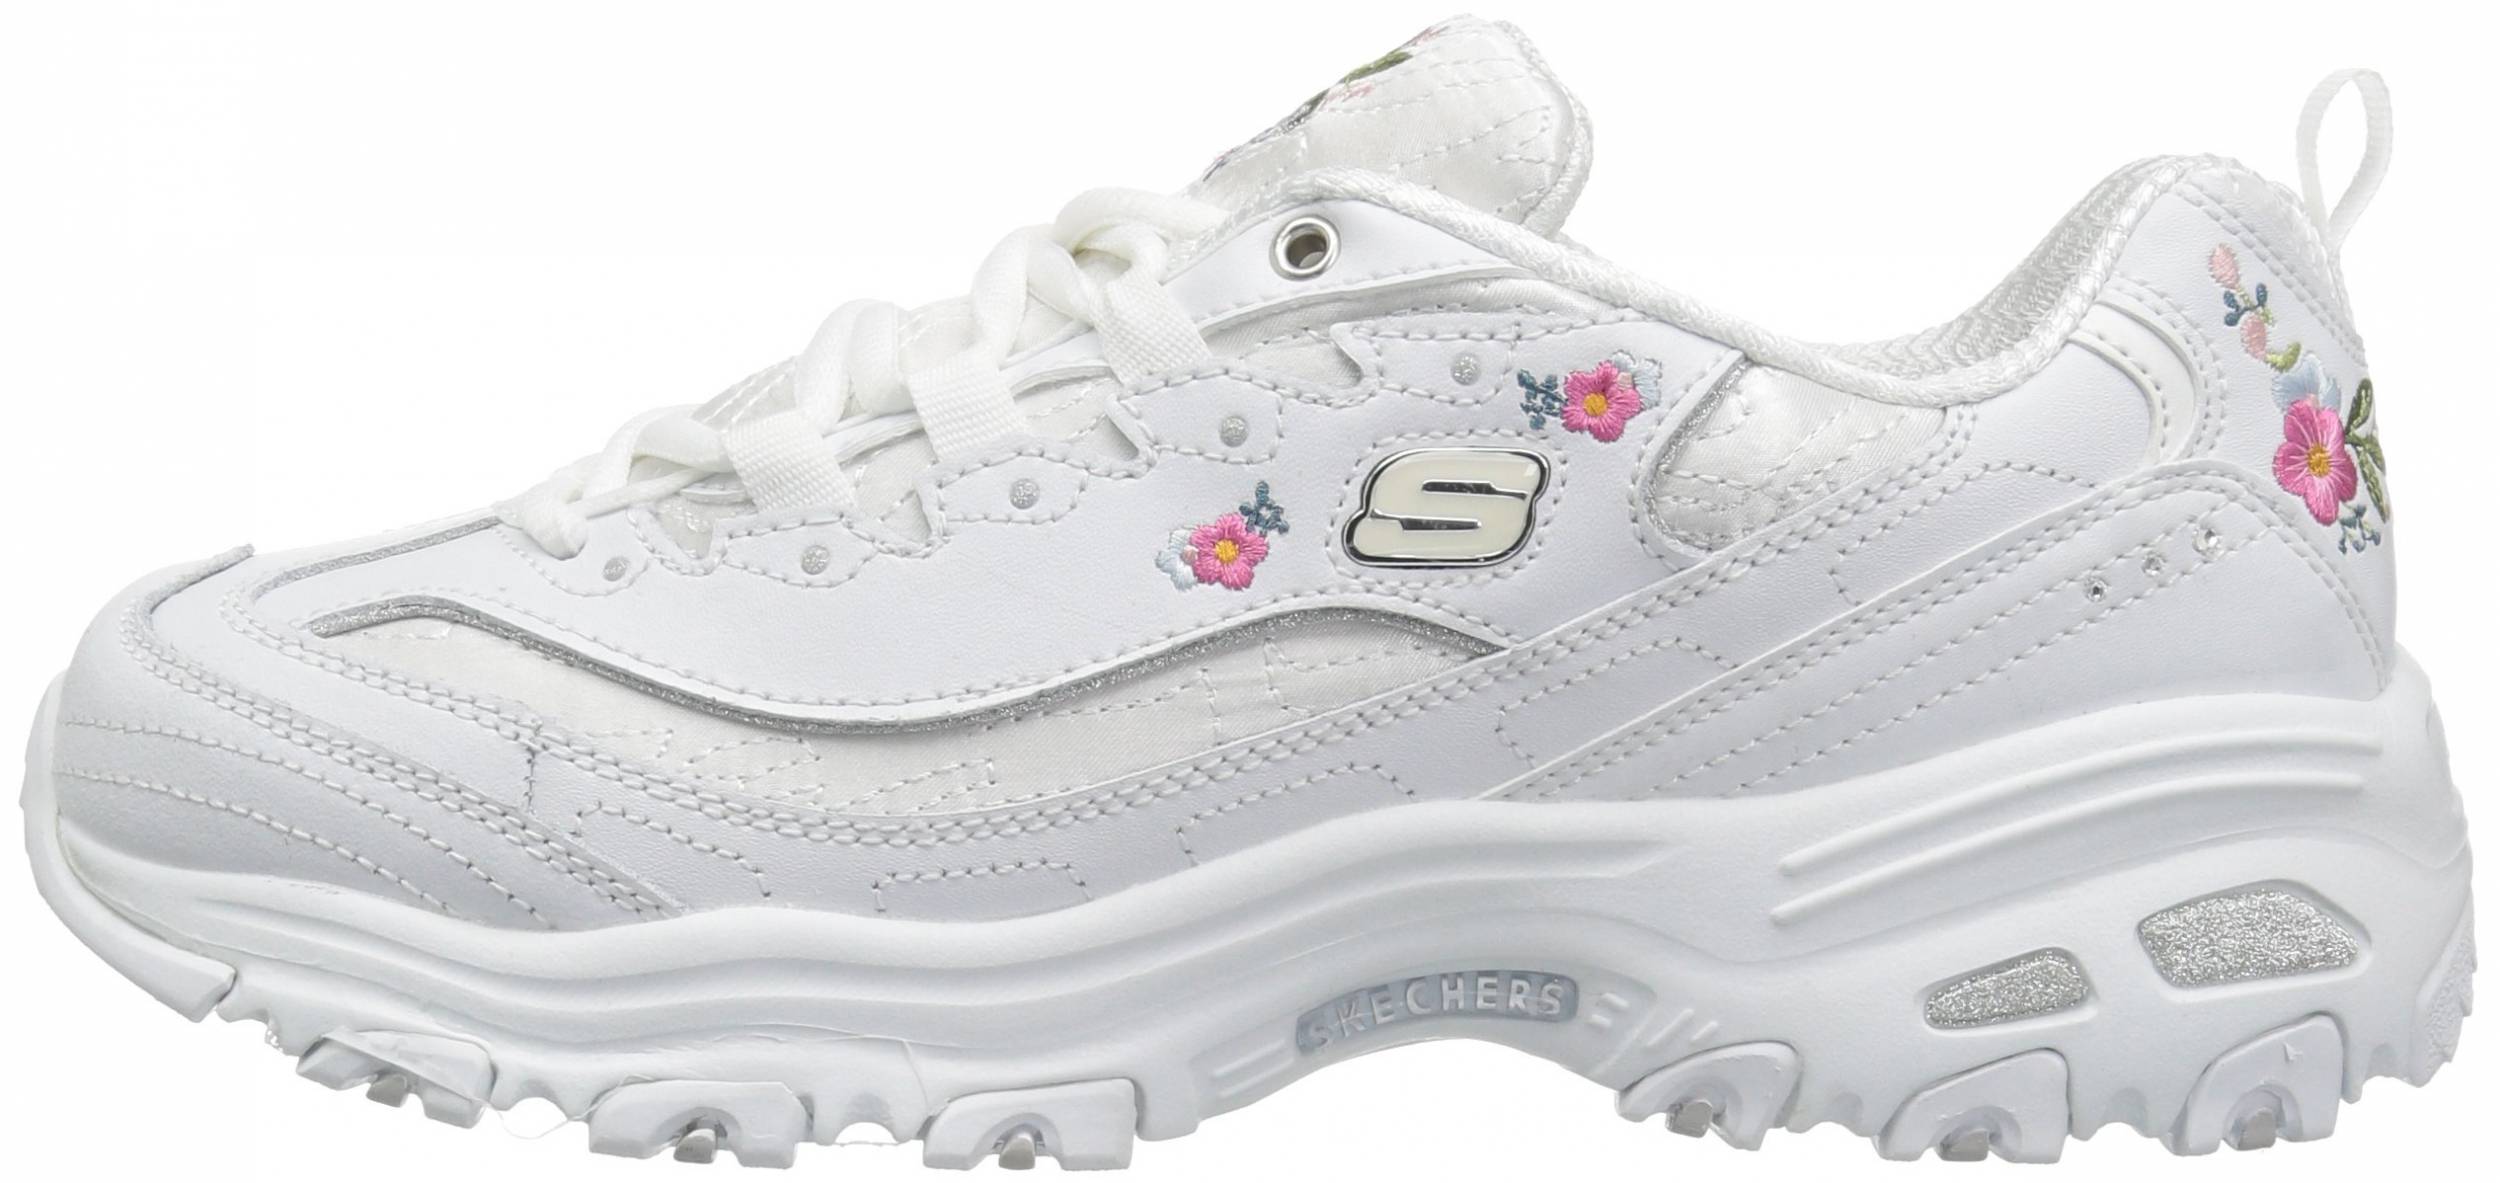 where to buy skechers tennis shoes